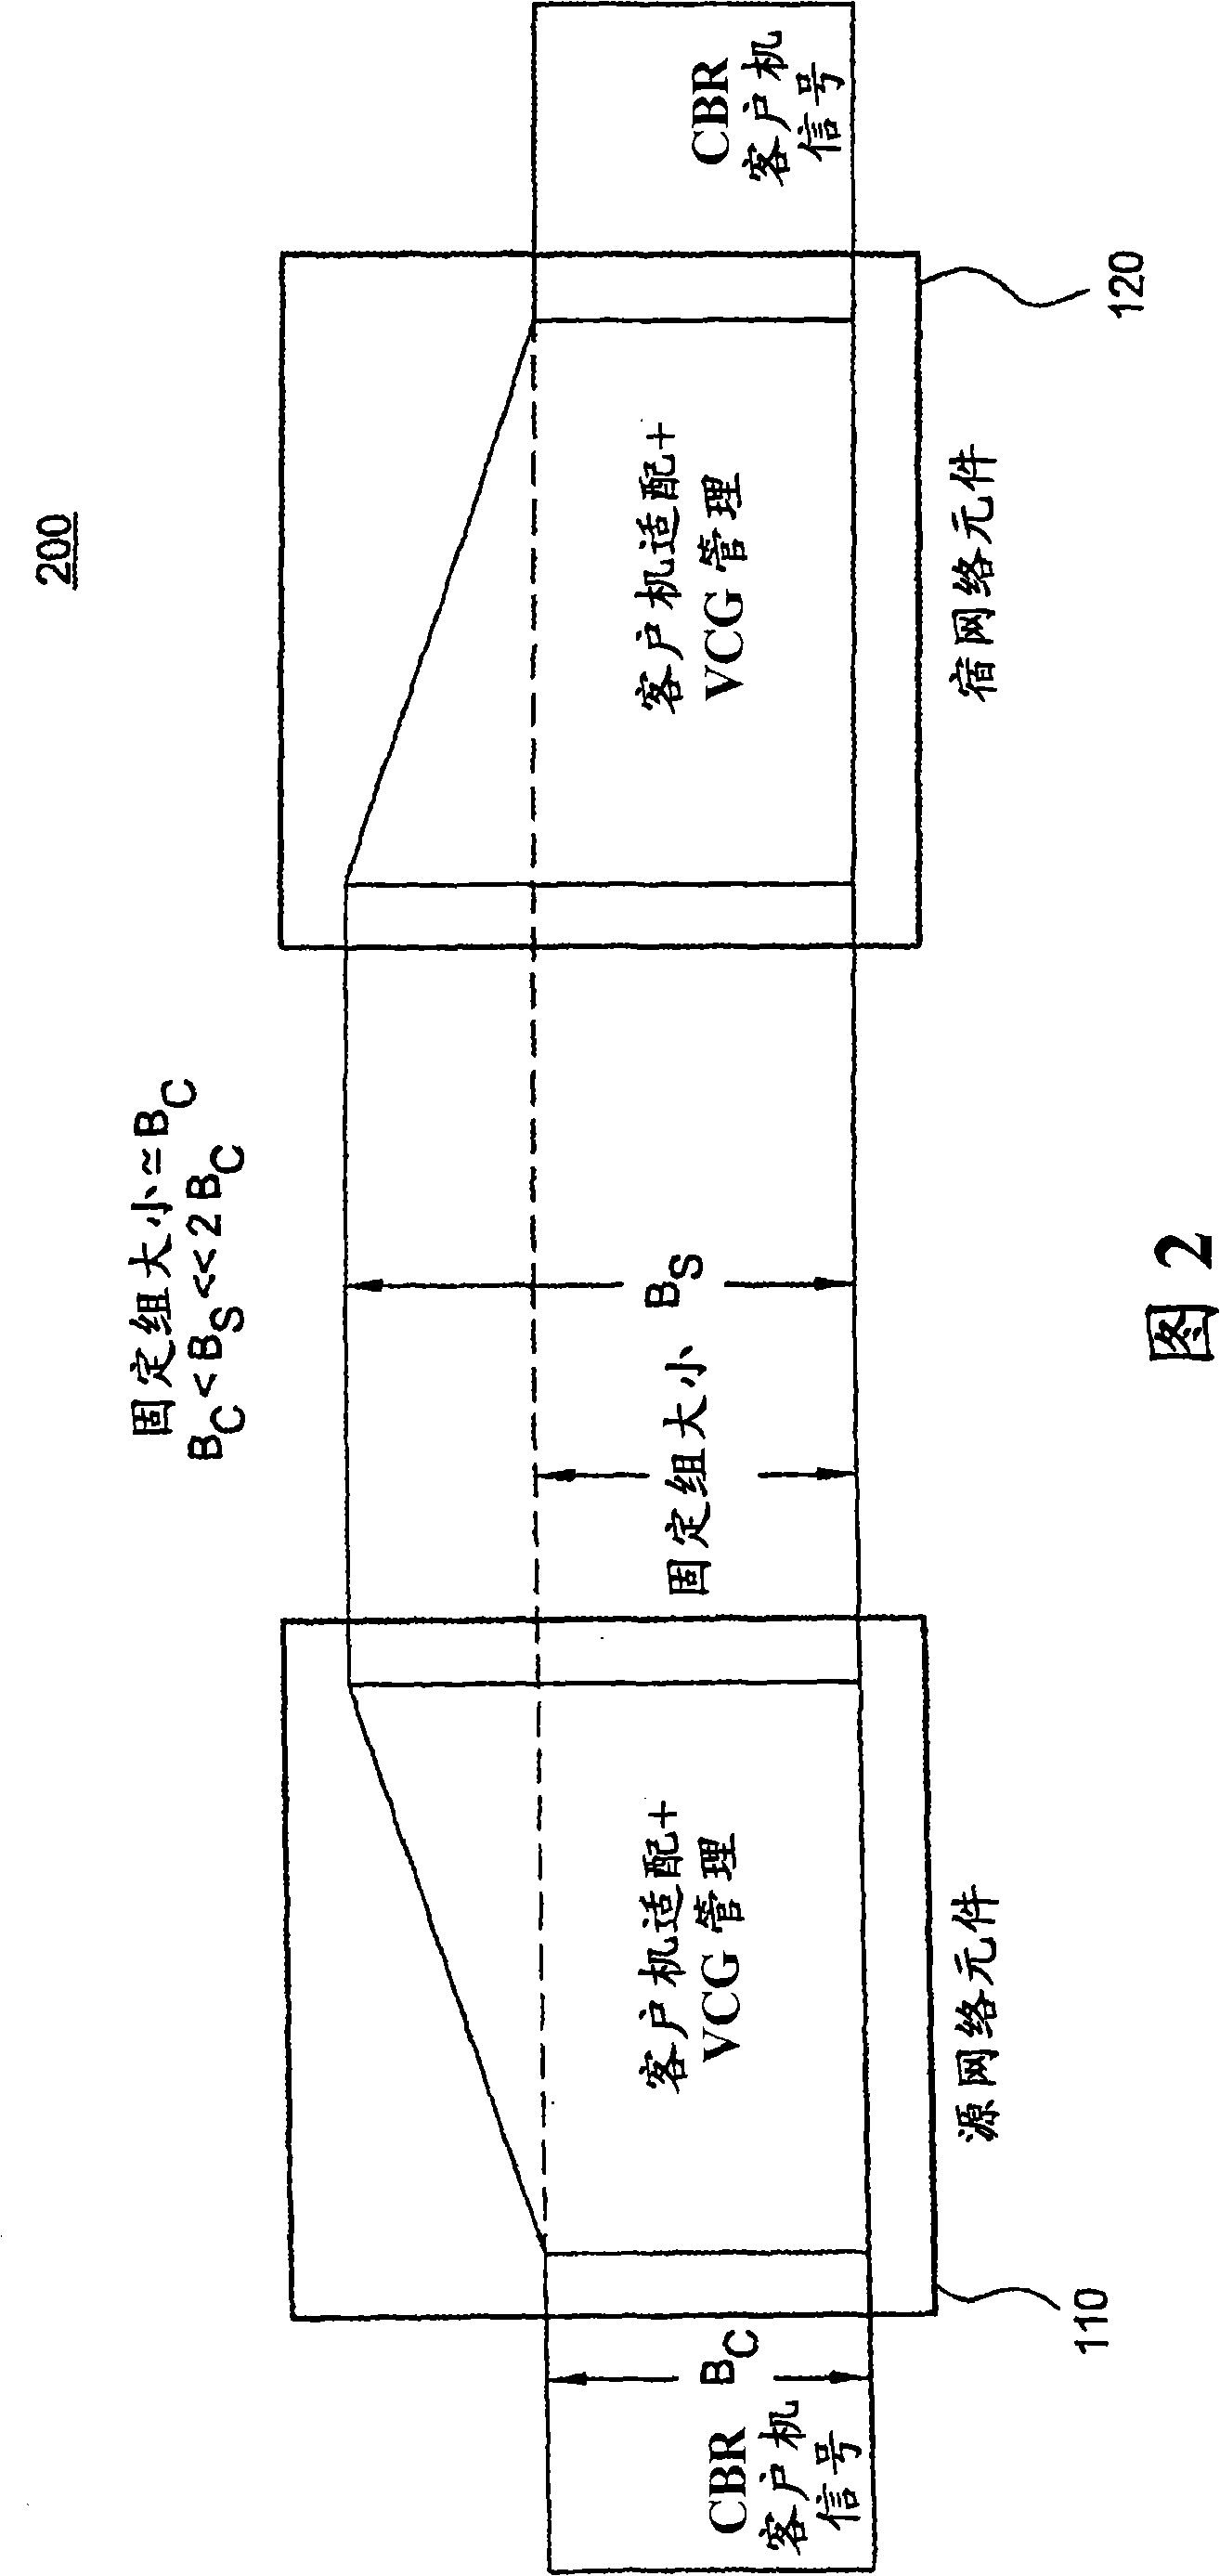 Method and apparatus for transporting client signals over transparent networks using virtual concatenation